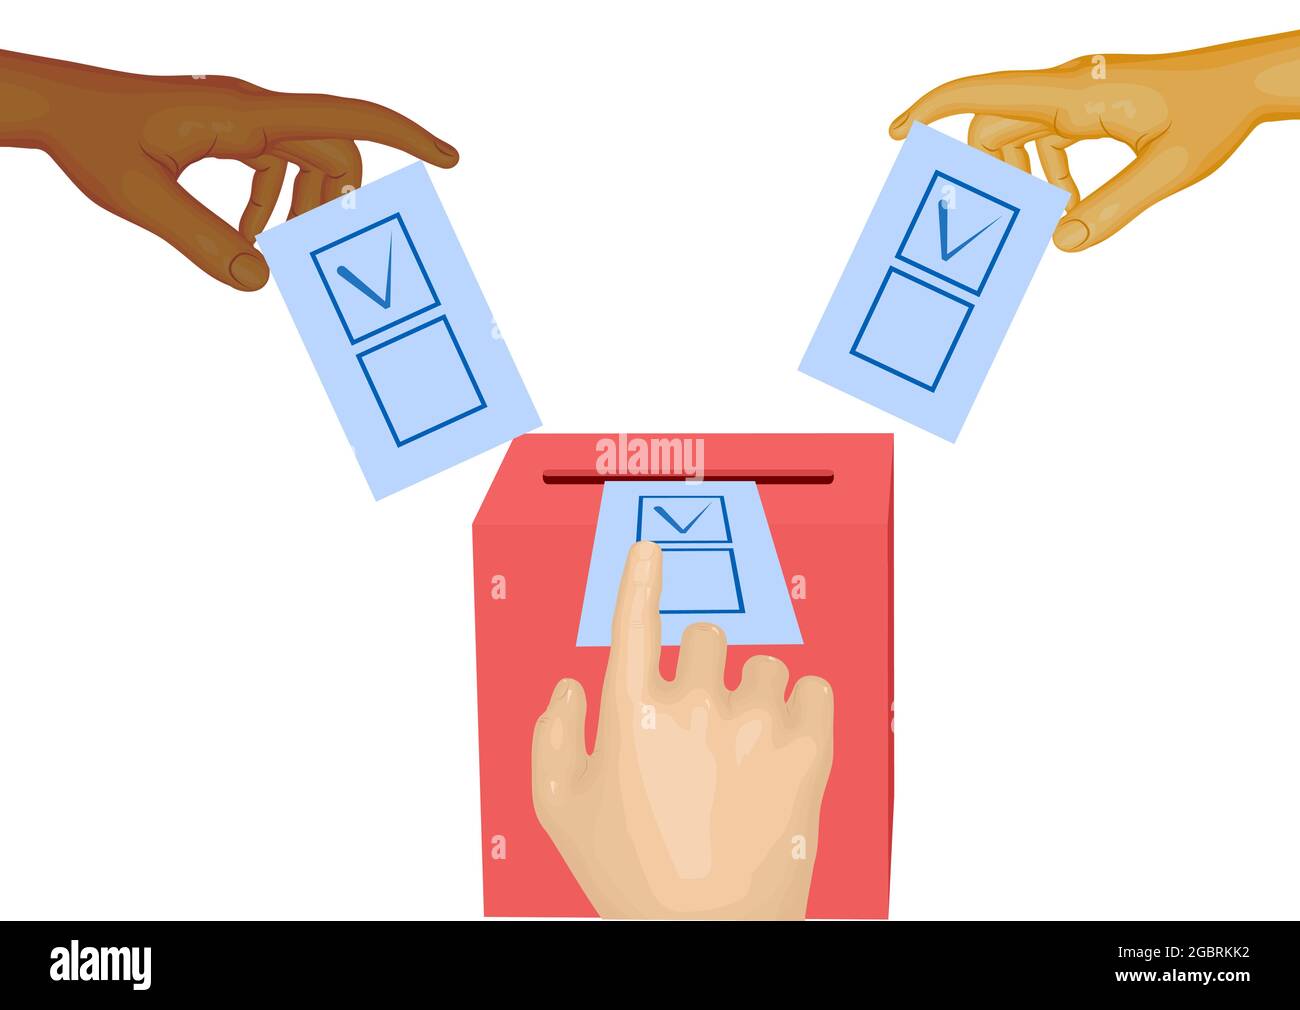 voting vector illustration with three hands Stock Vector